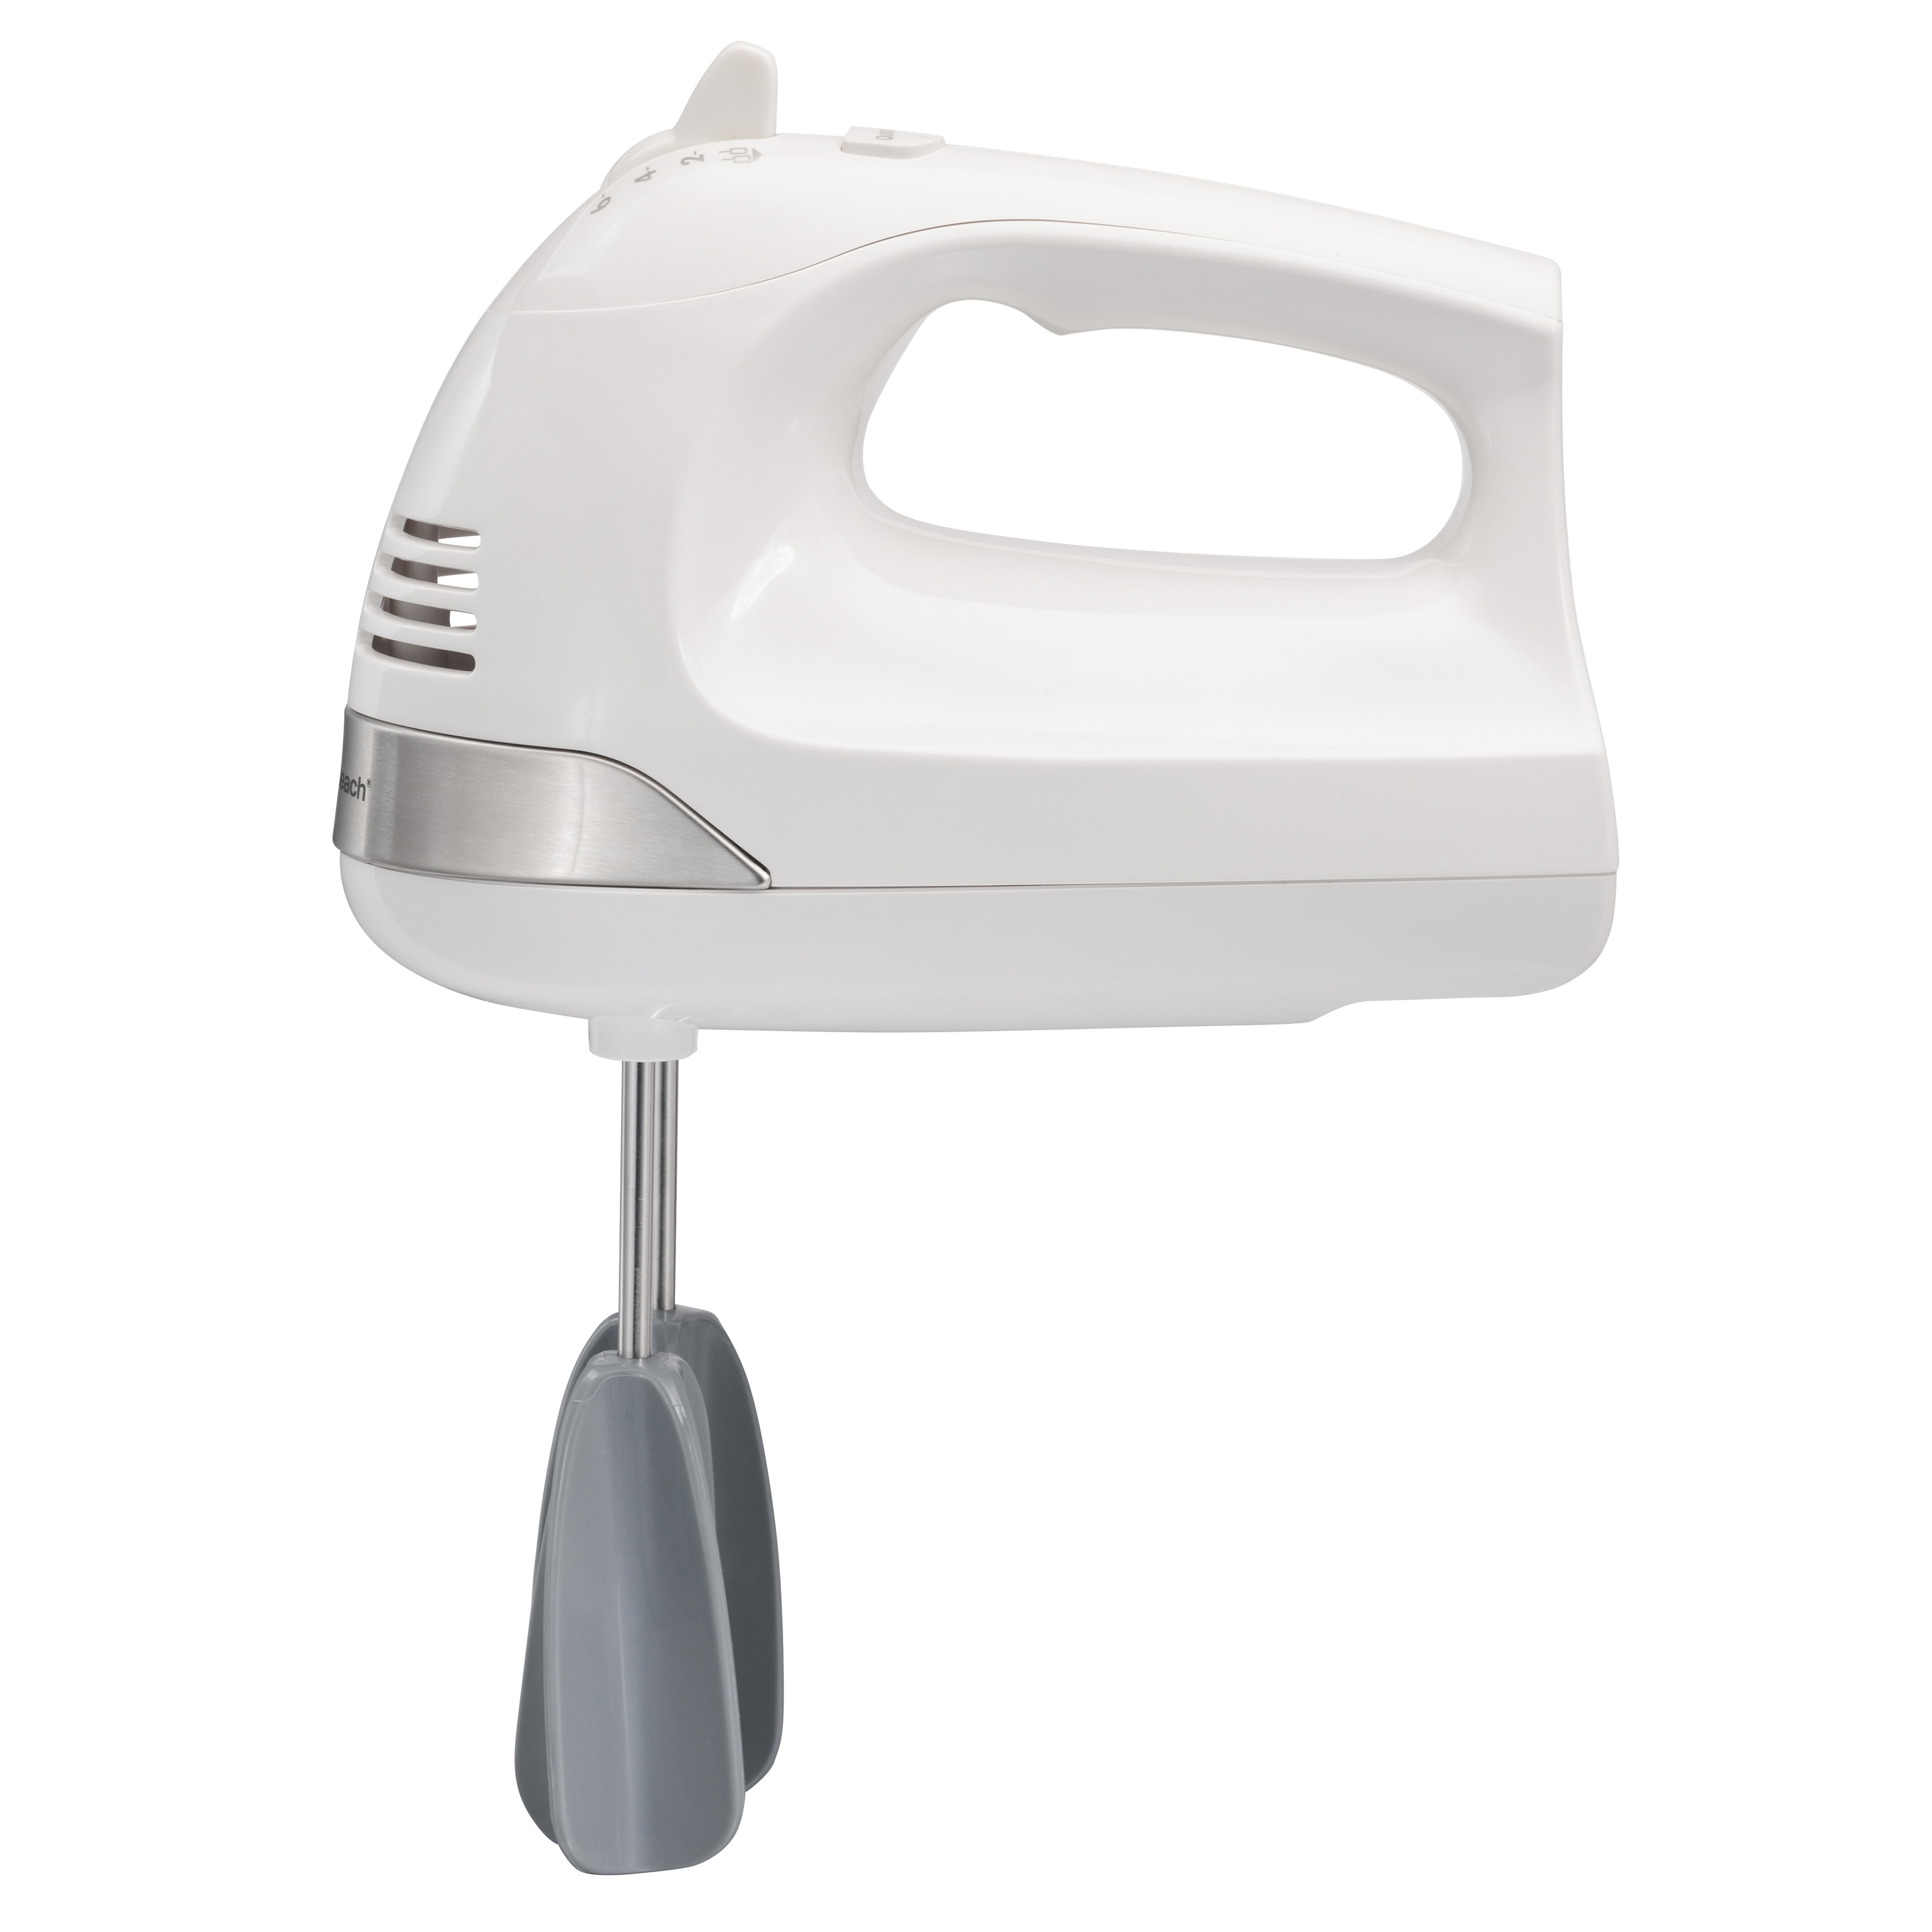 https://ak1.ostkcdn.com/images/products/is/images/direct/12b0d1fb5dd7031b939c1a9acab18a197da87690/Hamilton-Beach-6-Speed-Hand-Mixer-with-Easy-Clean-Beaters.jpg